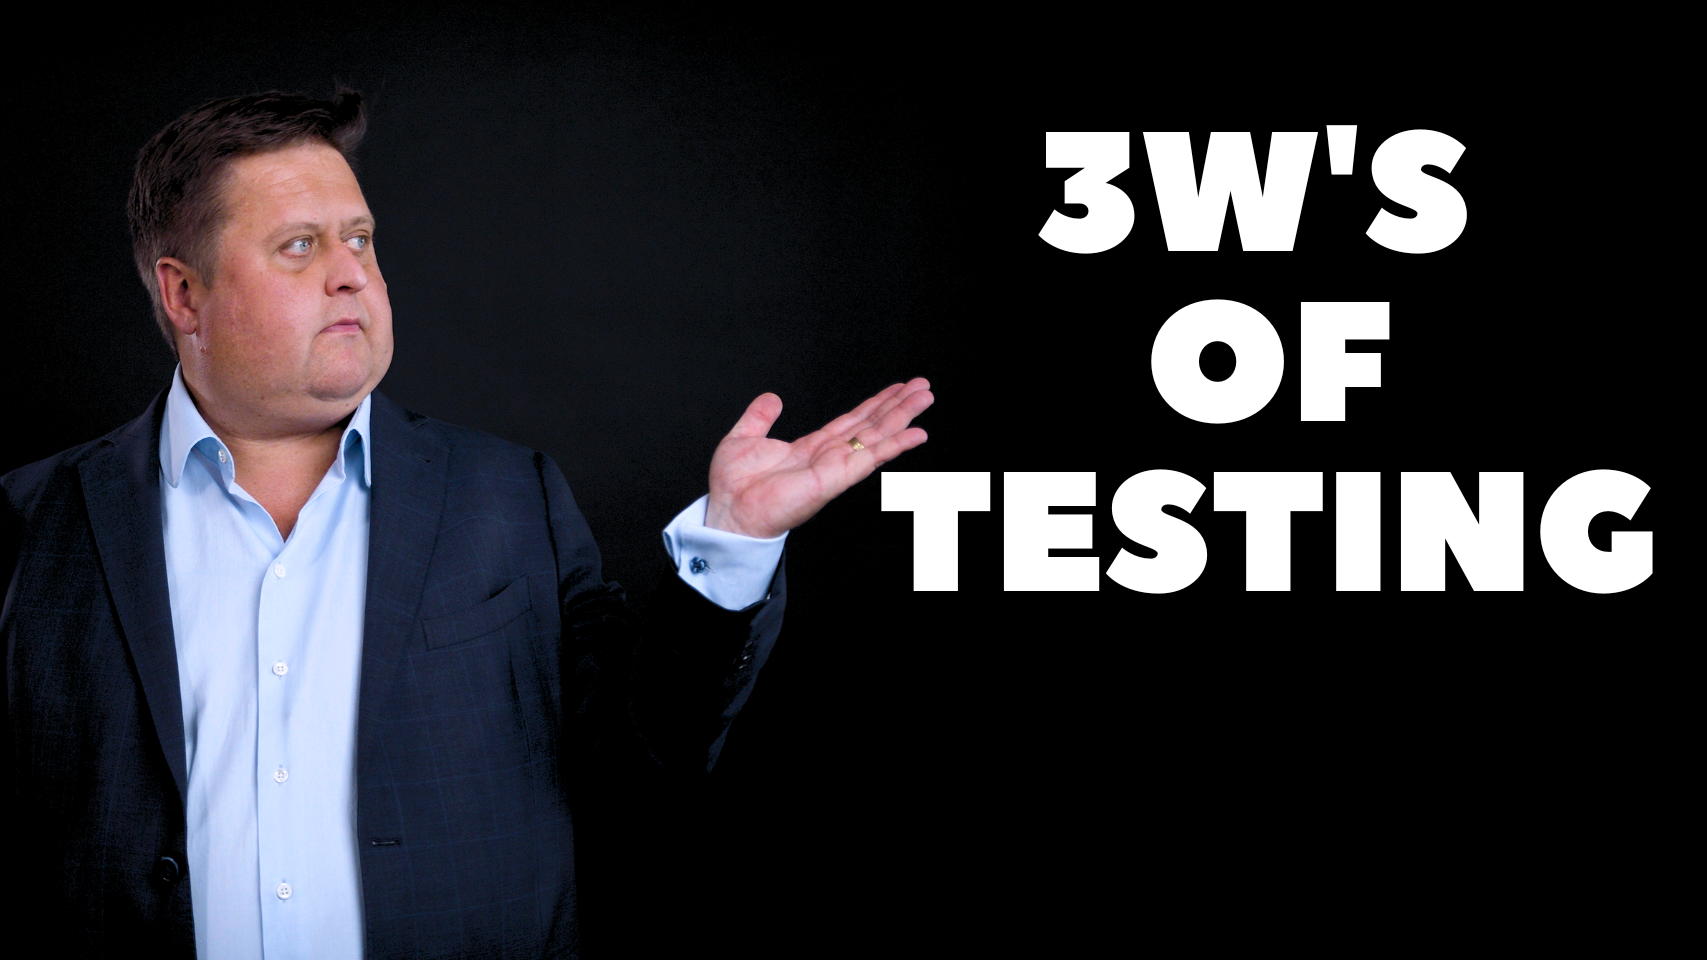 3ws of testing